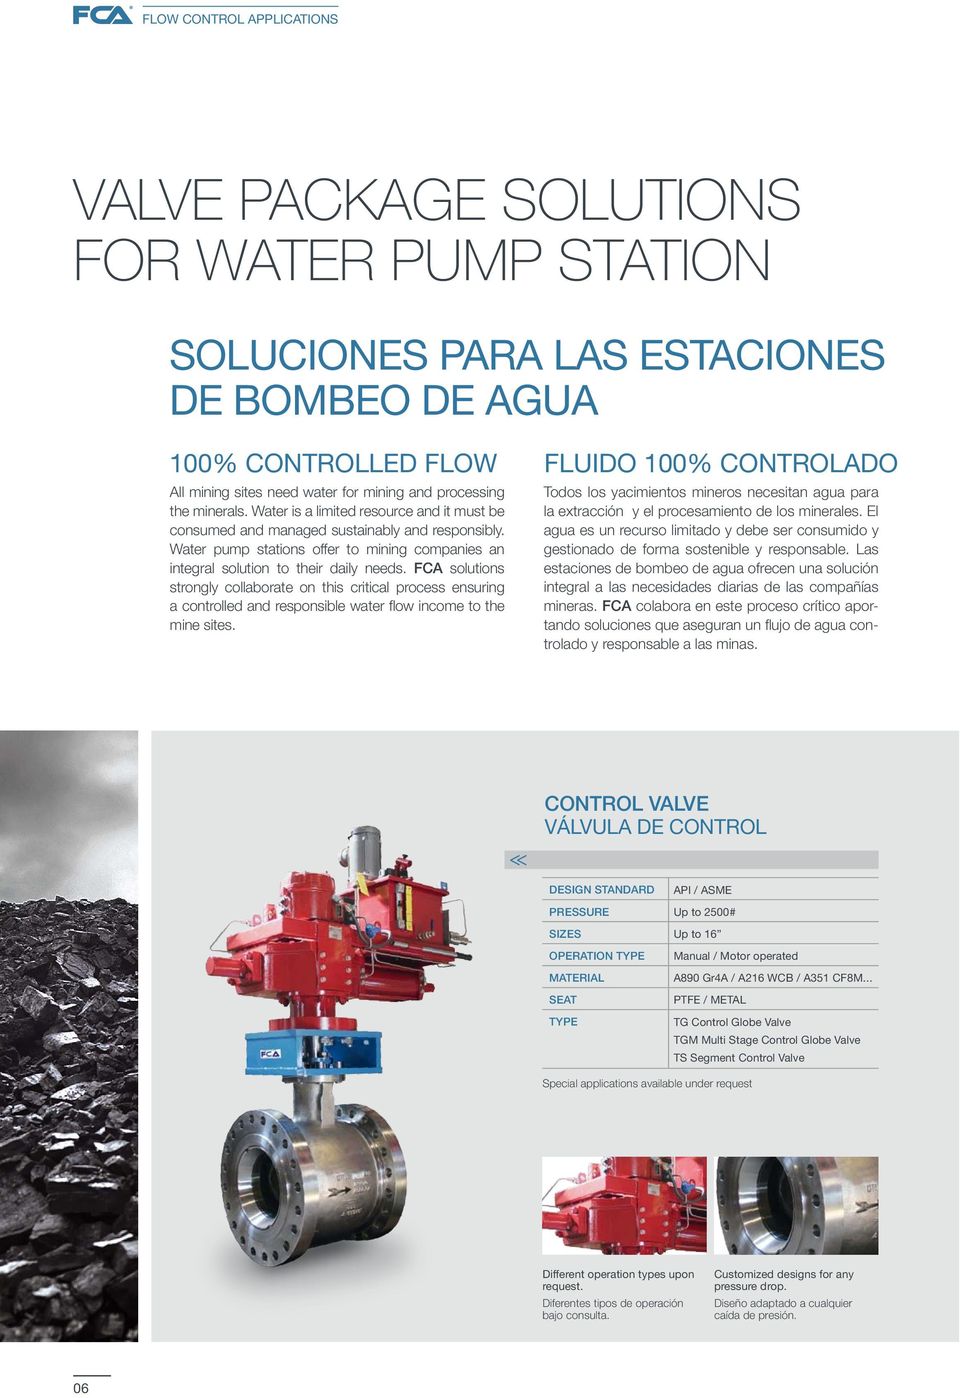 Water pump stations offer to mining companies an integral solution to their daily needs.